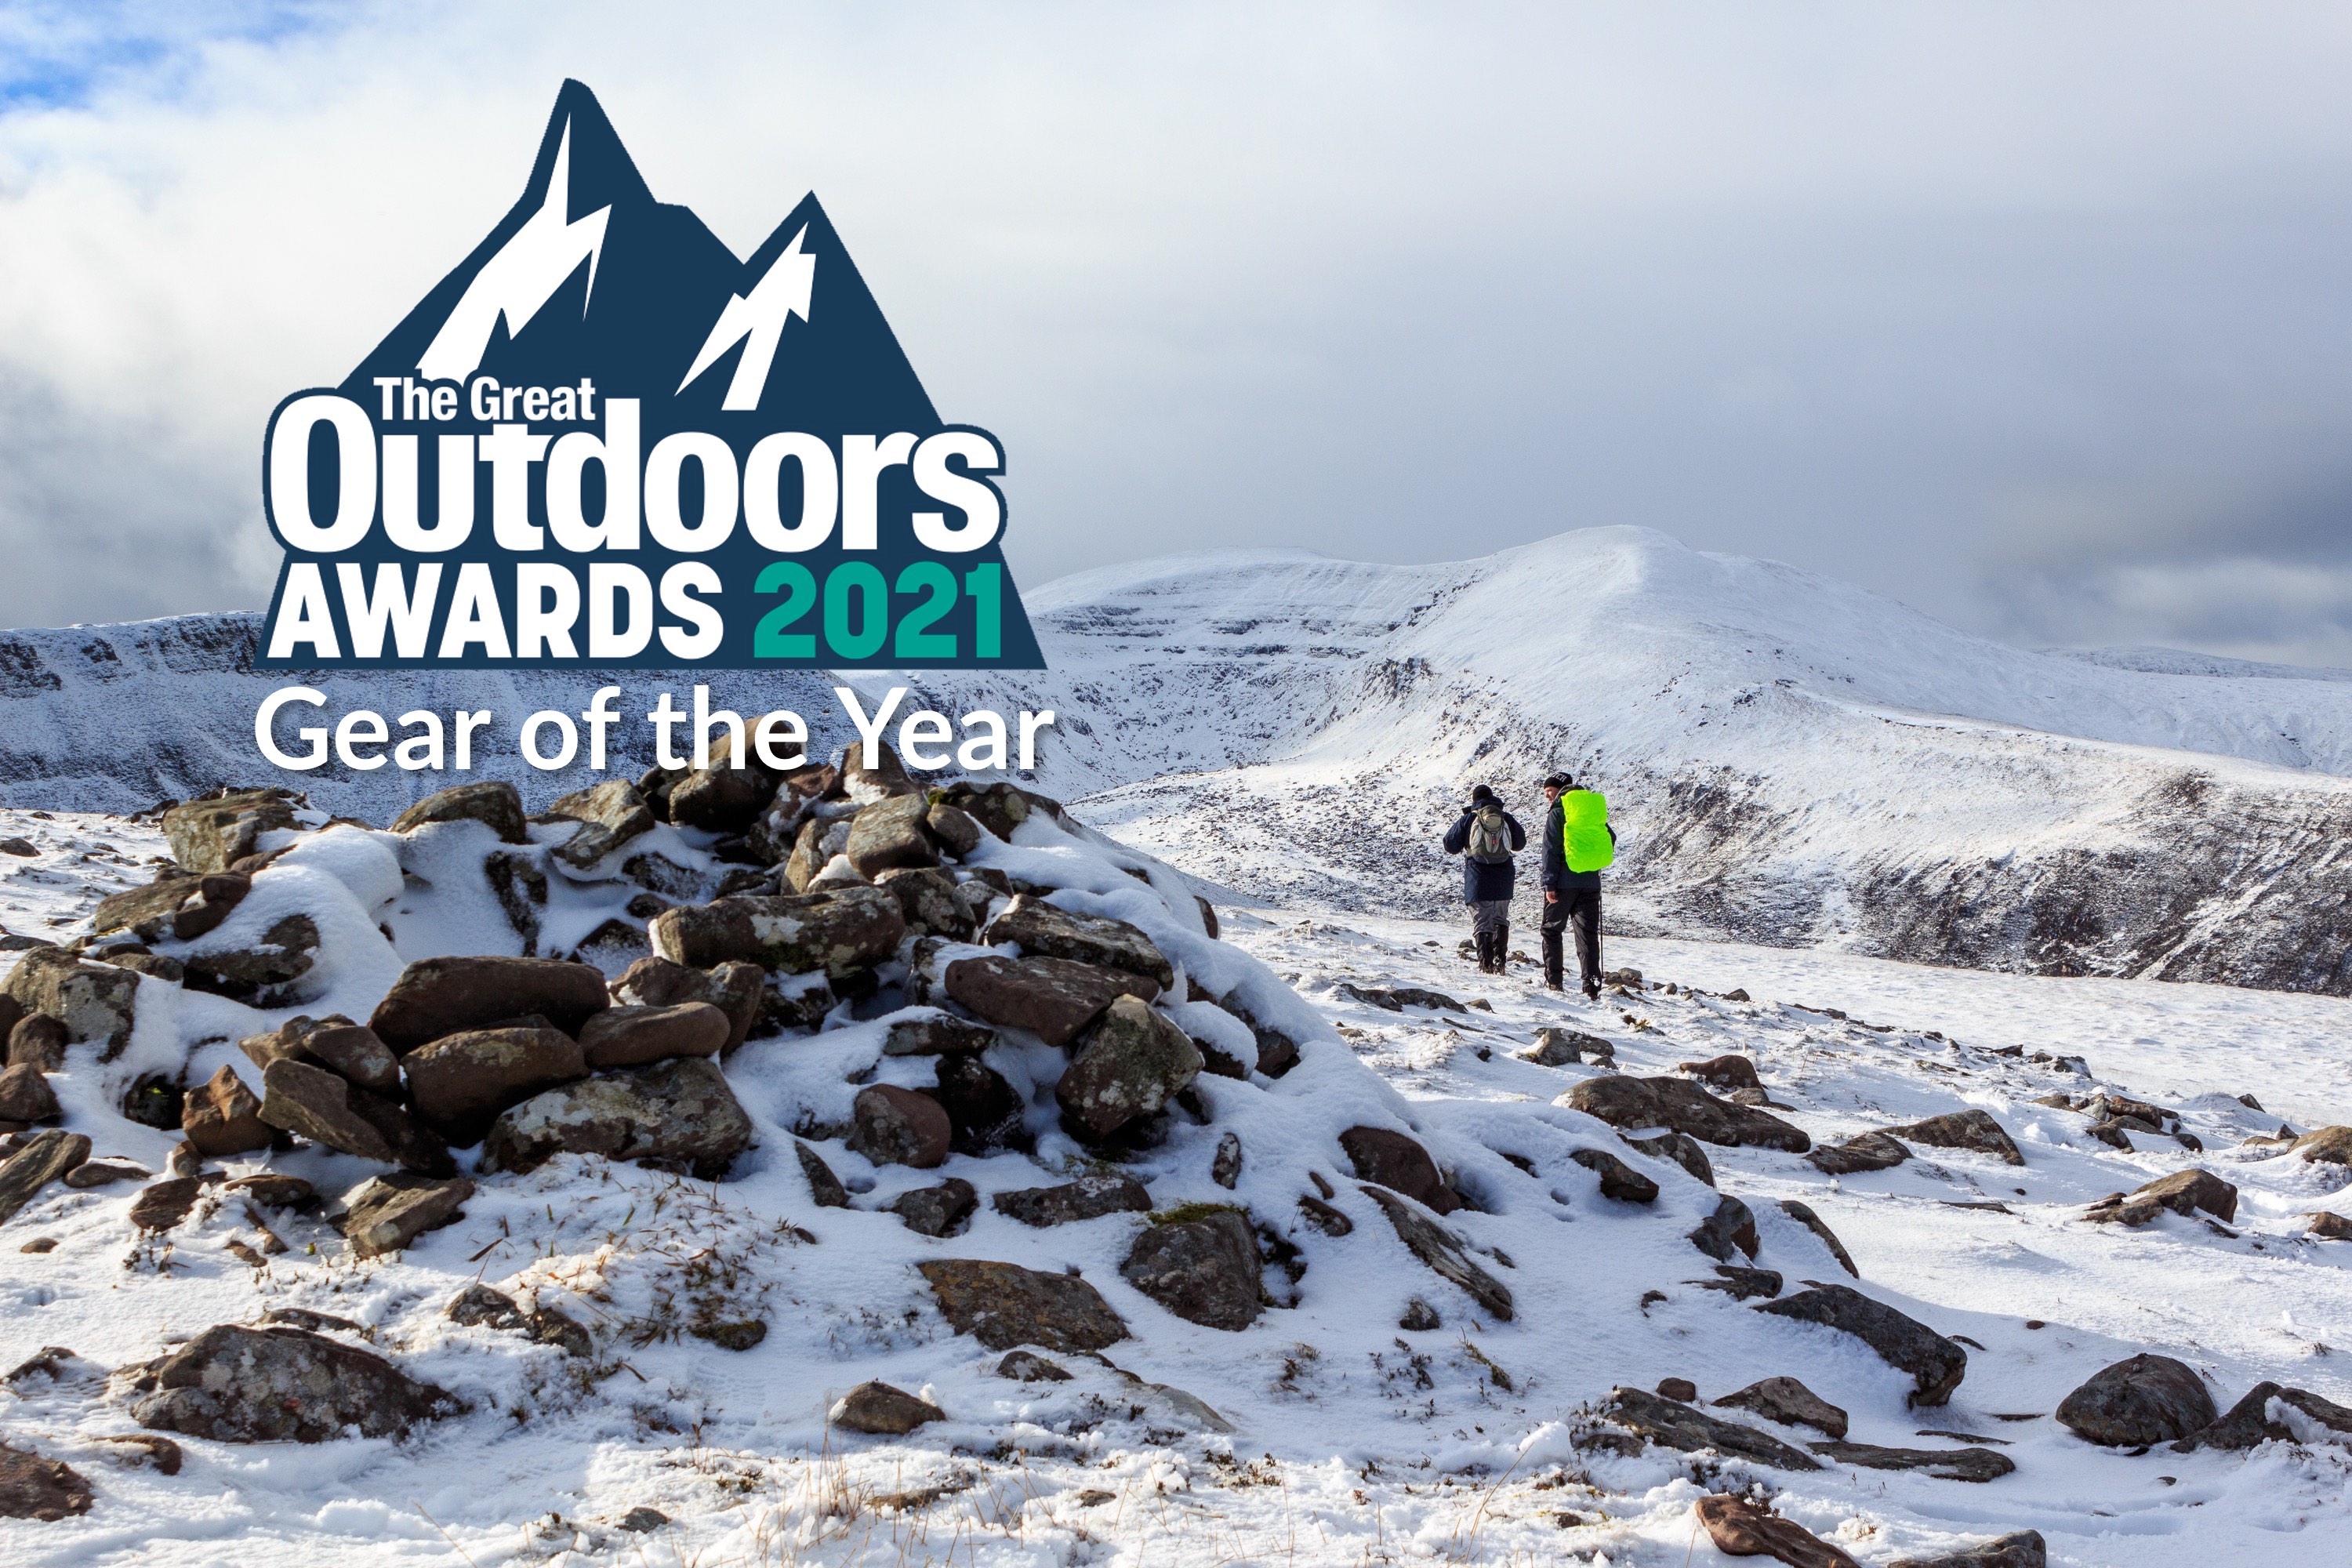 The Great Outdoors Gear of the Year Awards